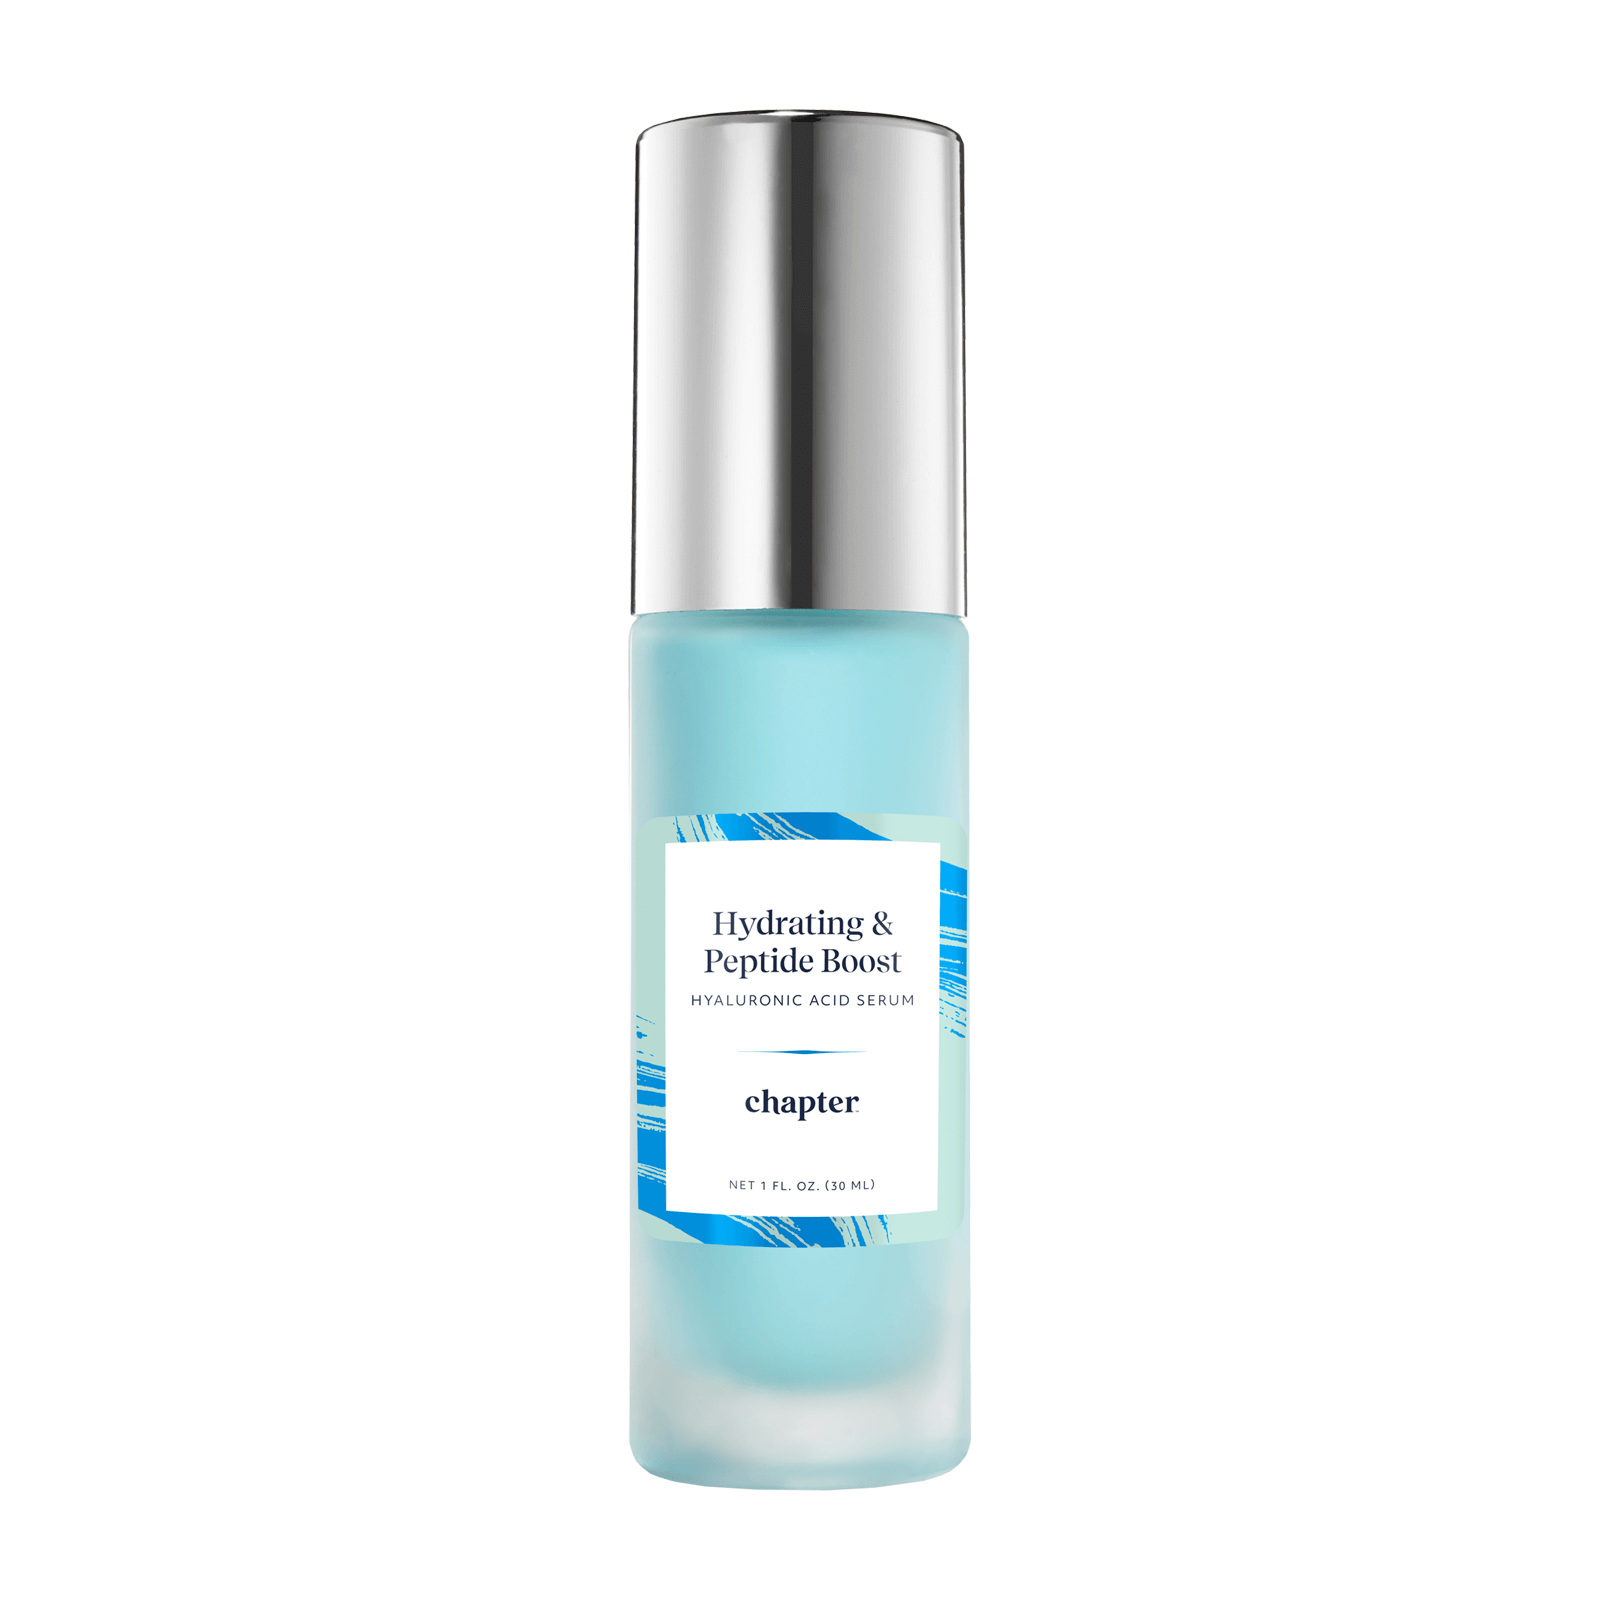 Hydrating & Peptide Boost